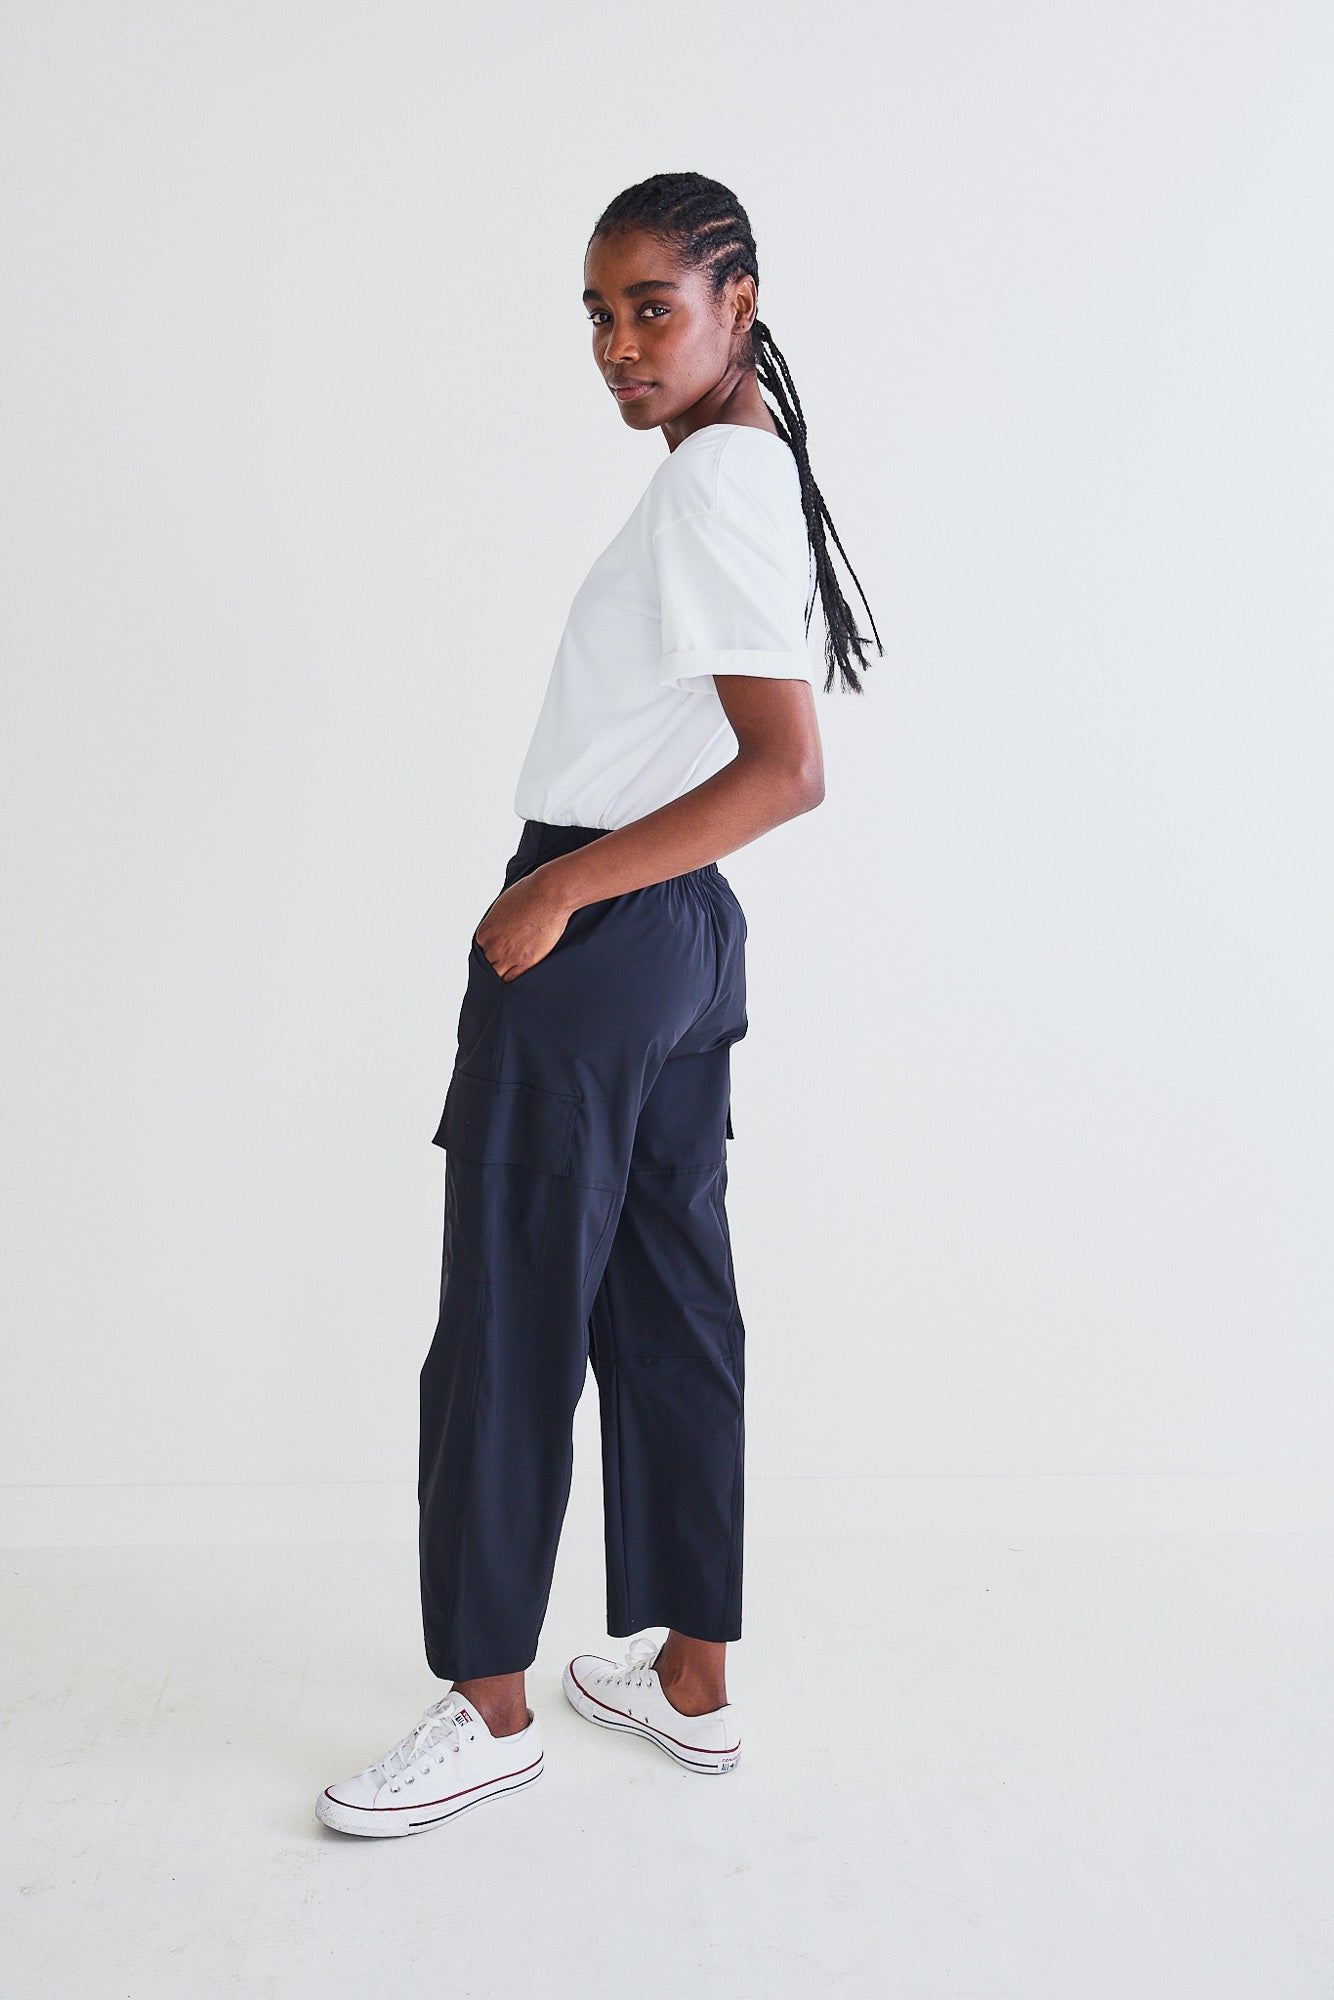 The New Age Utility Pants